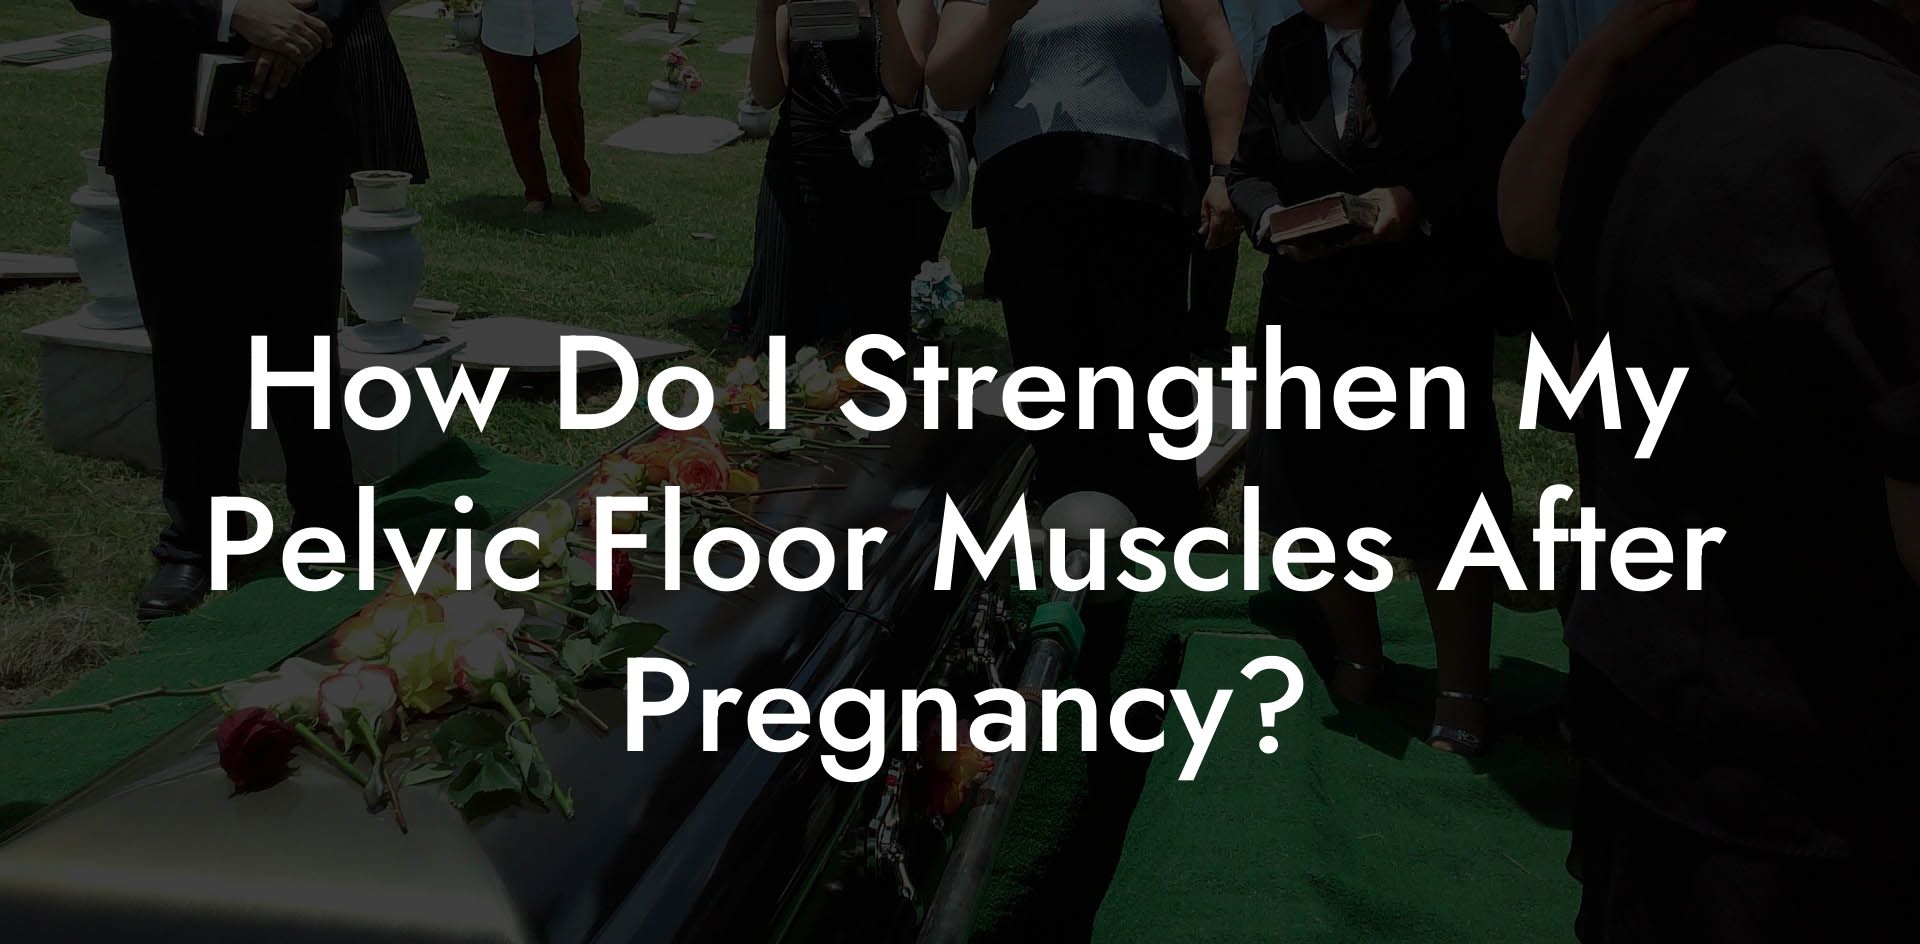 How Do I Strengthen My Pelvic Floor Muscles After Pregnancy?